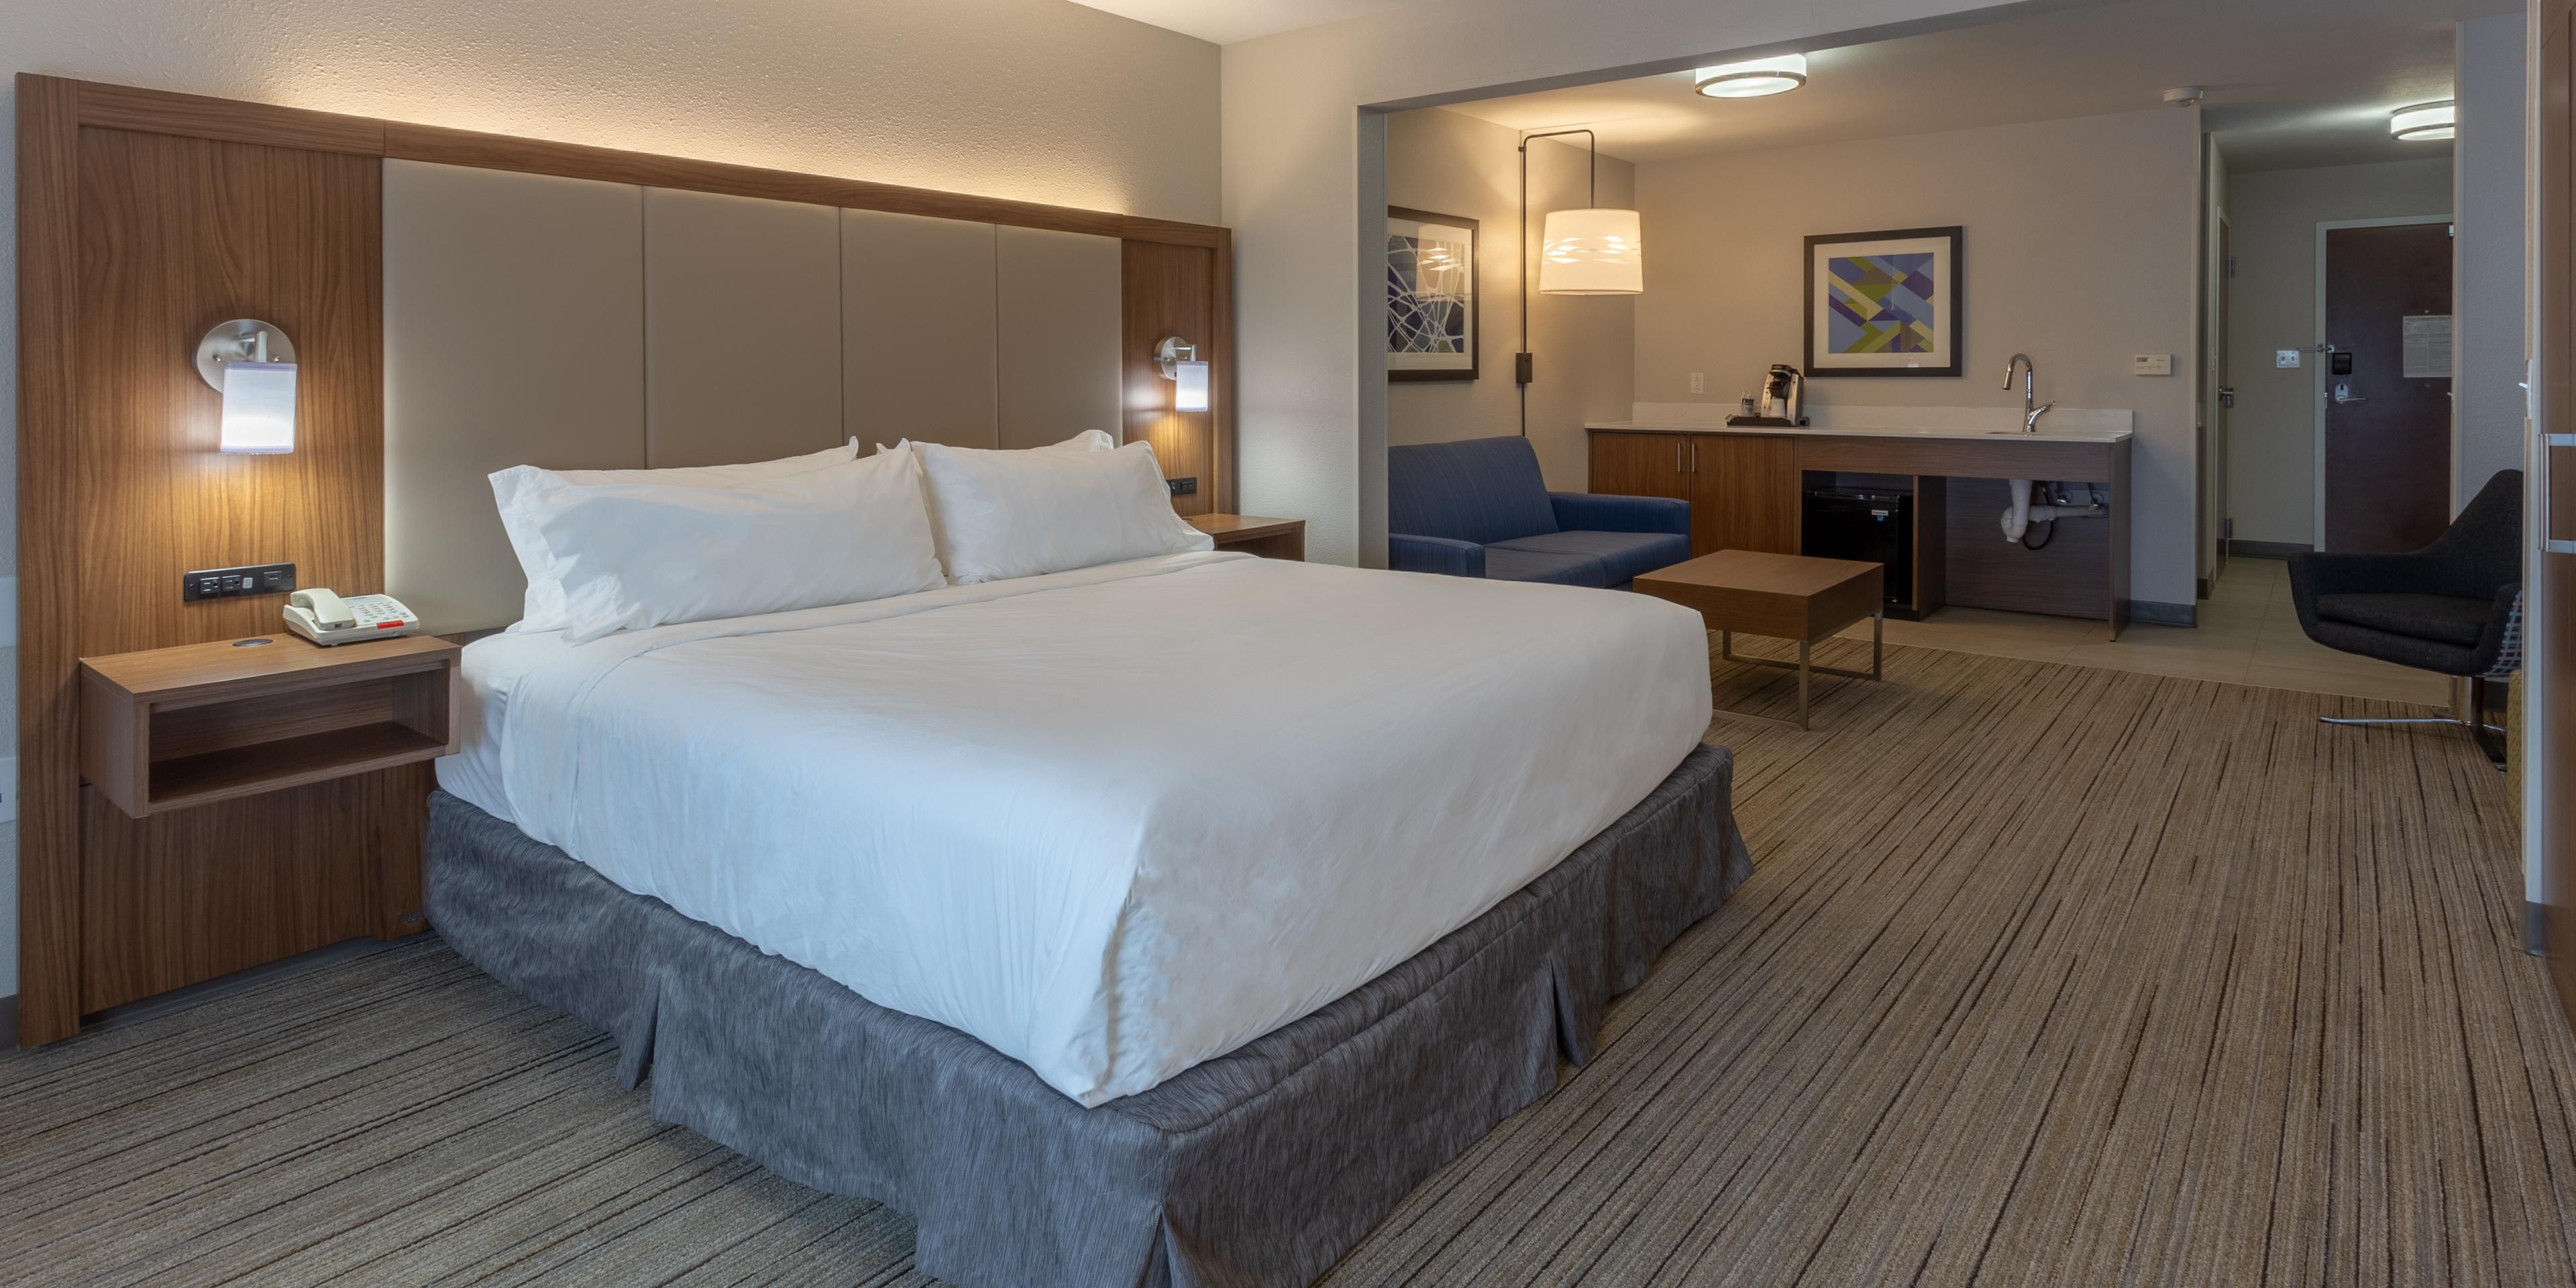 Each of our spacious guest rooms include a Mini Fridge, Microwave & Coffee Maker to help make you feel right at home!